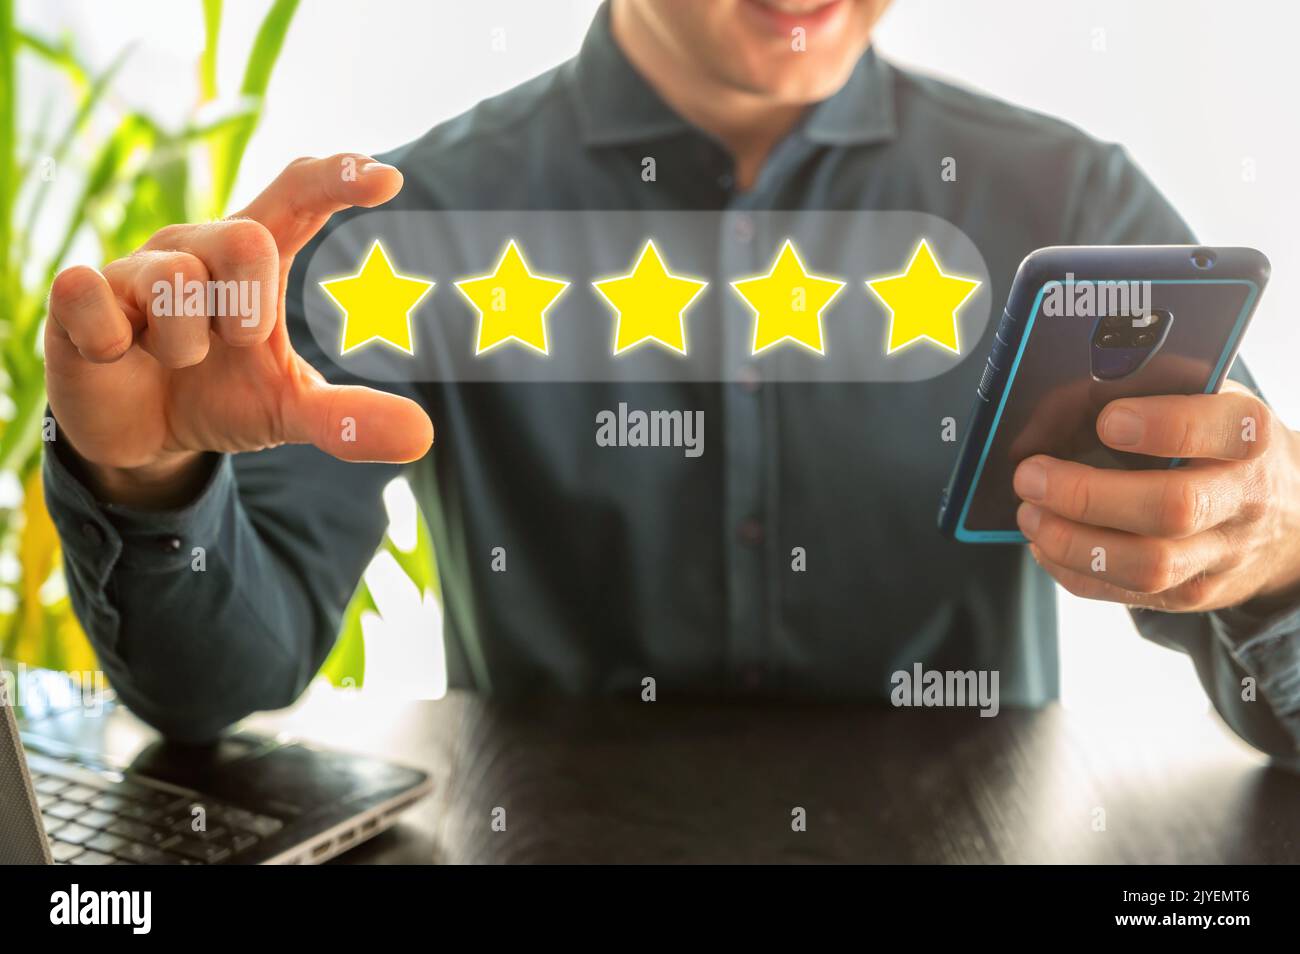 Satisfied customers rate the product or service online with five stars Stock Photo